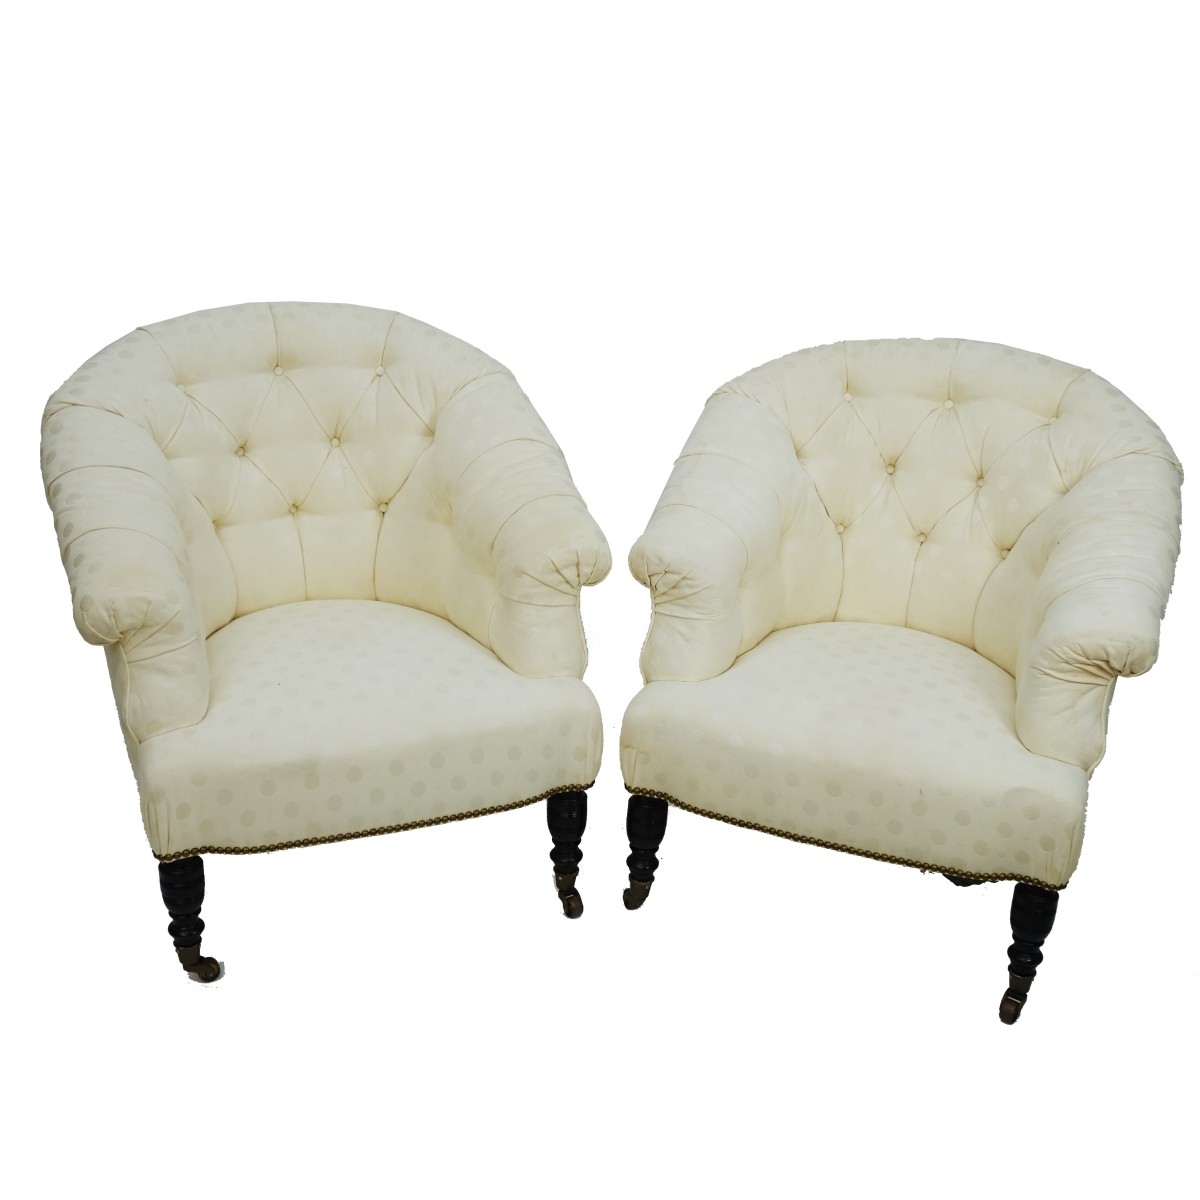 Pair of Upholstered Barrel Chairs